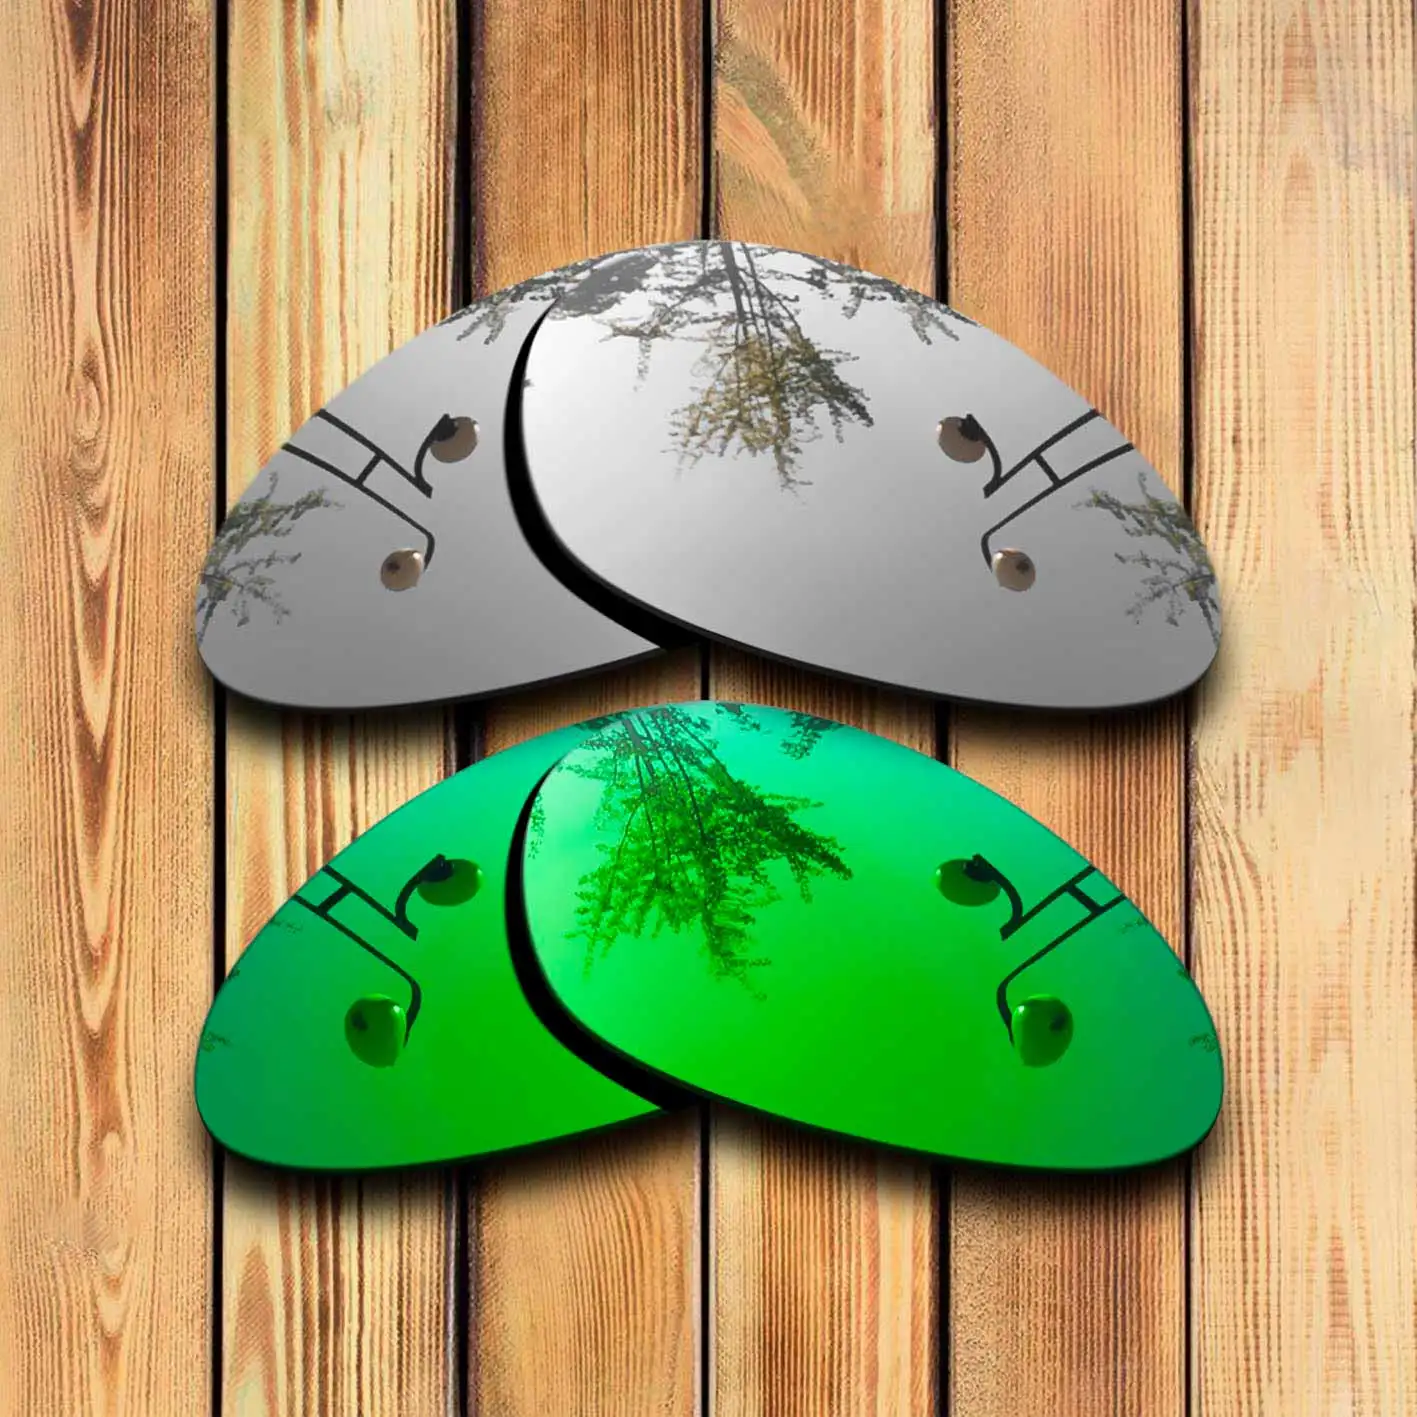 100% Precisely Cut Polarized Replacement Lenses for Minute 2.0 Sunglasses  Chrome & Green Combine Options